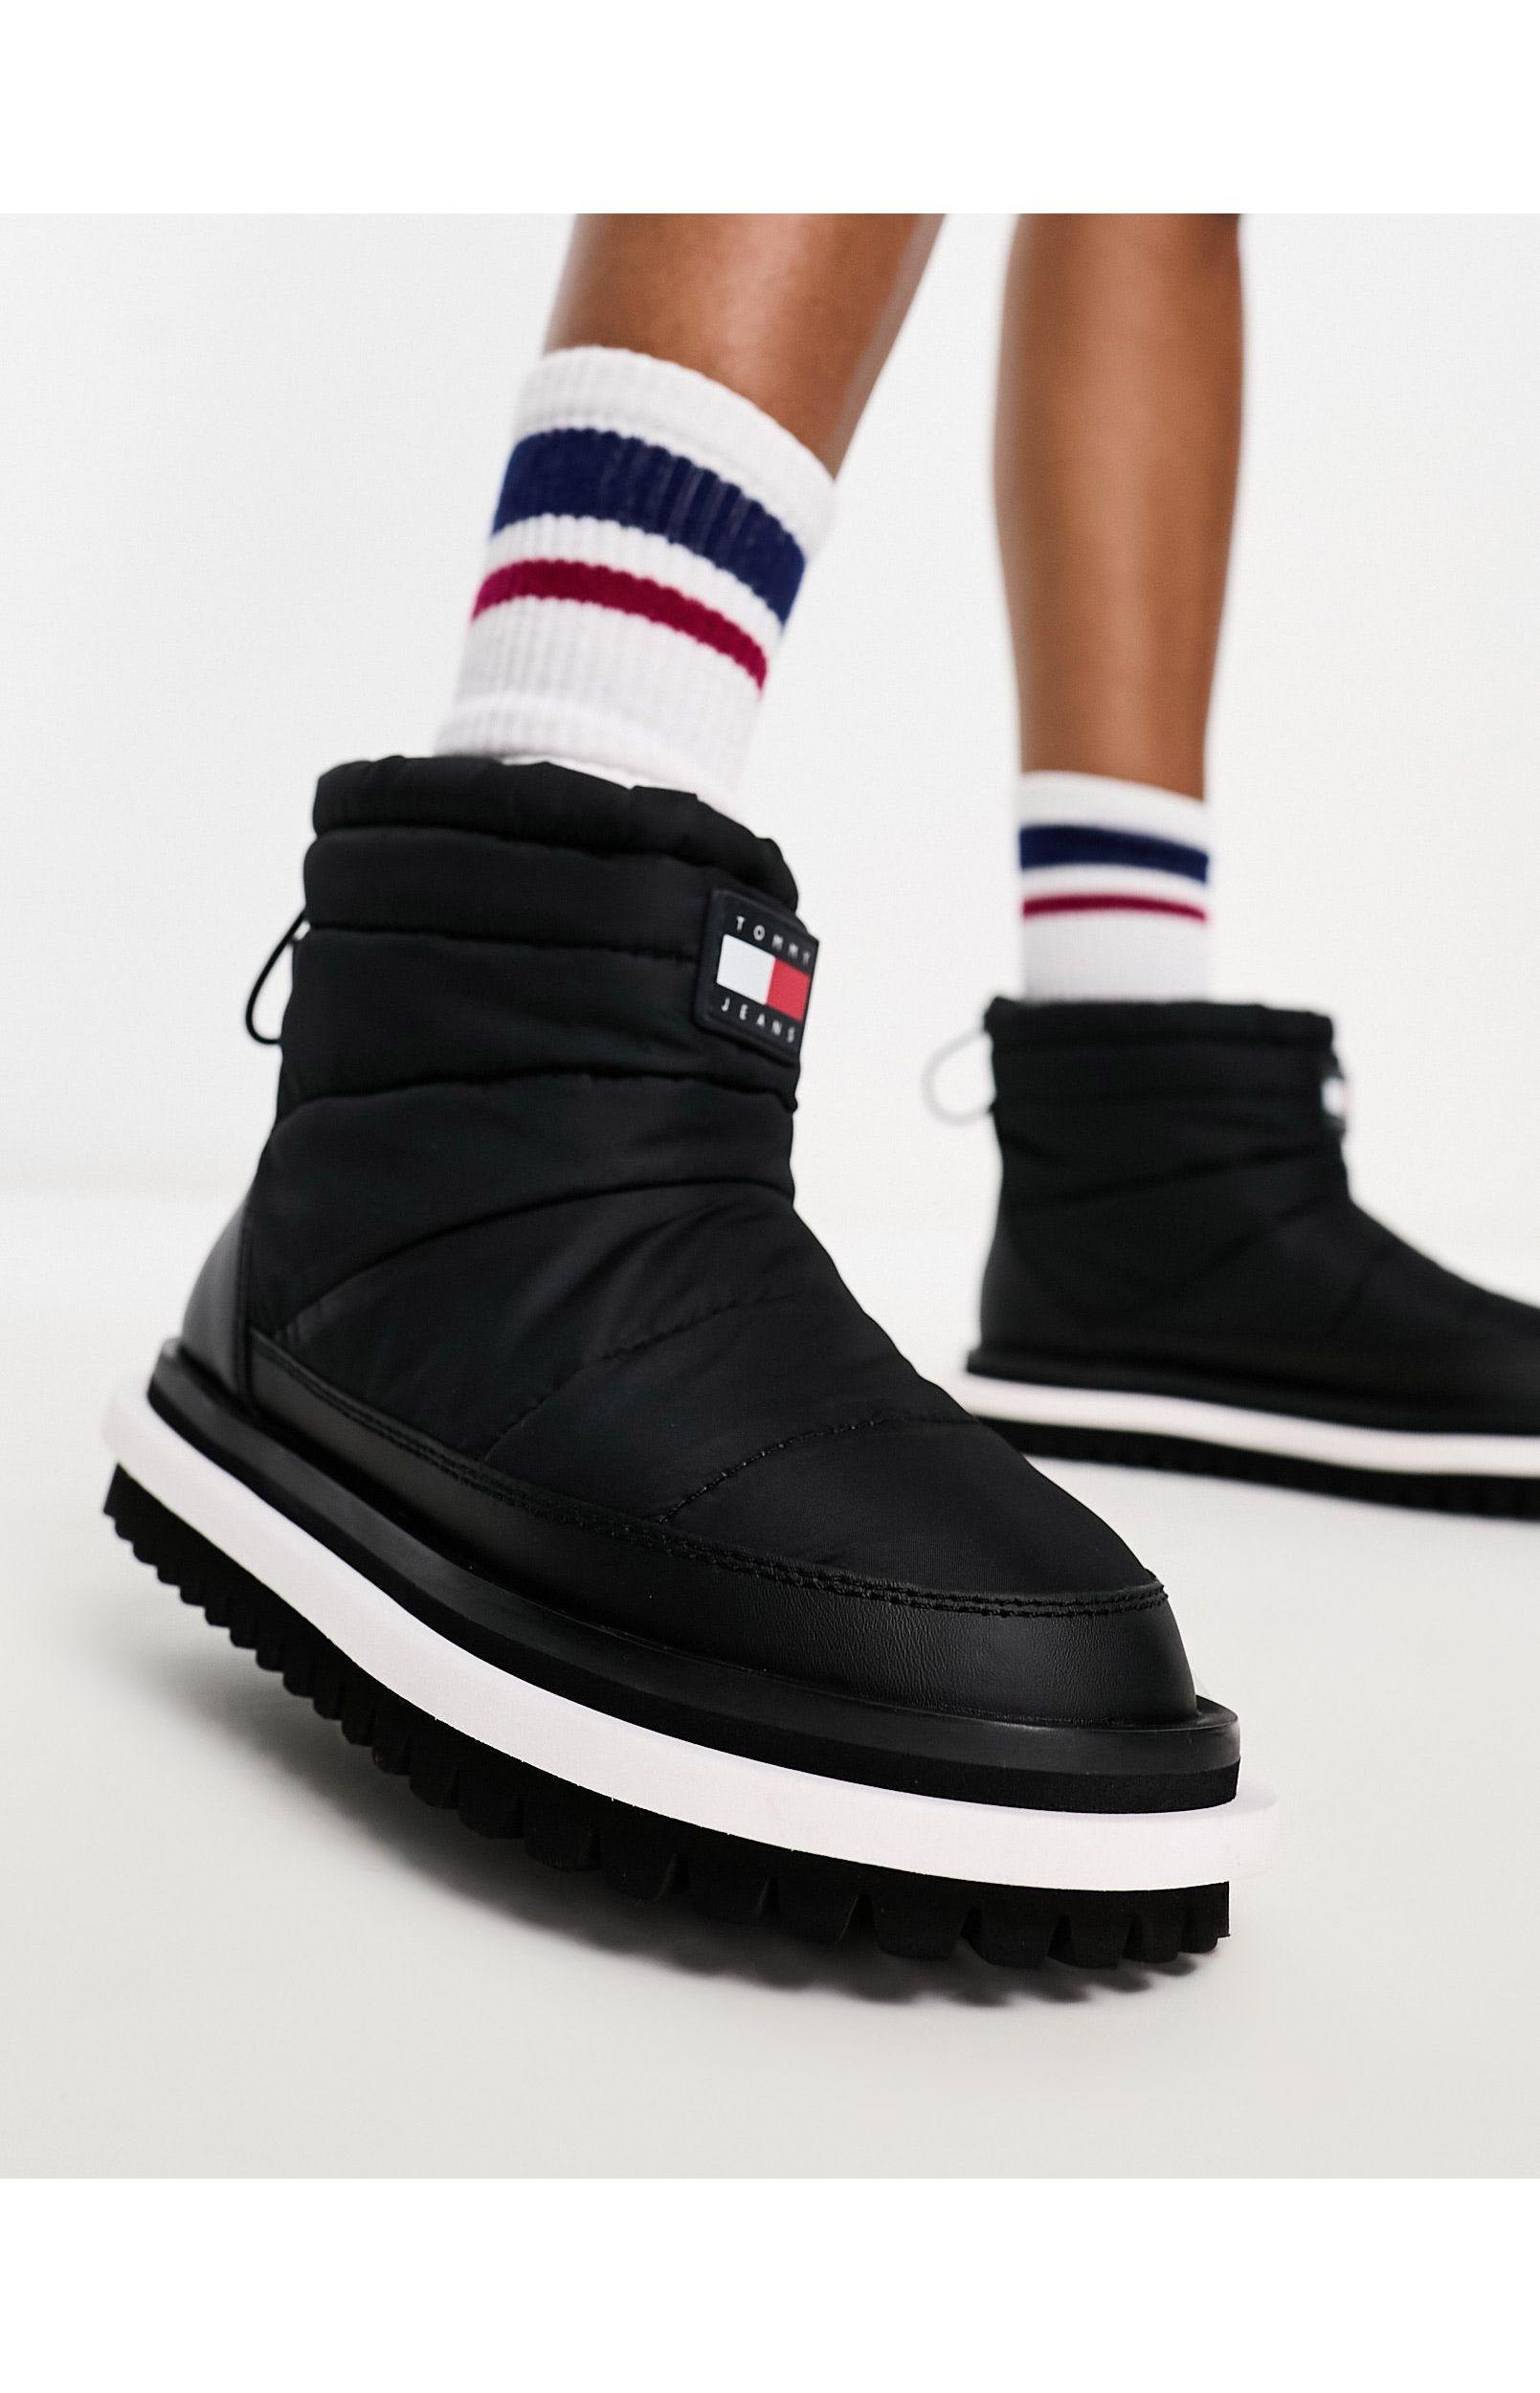 Tommy Hilfiger Padded Flat Boots in Black | Lyst